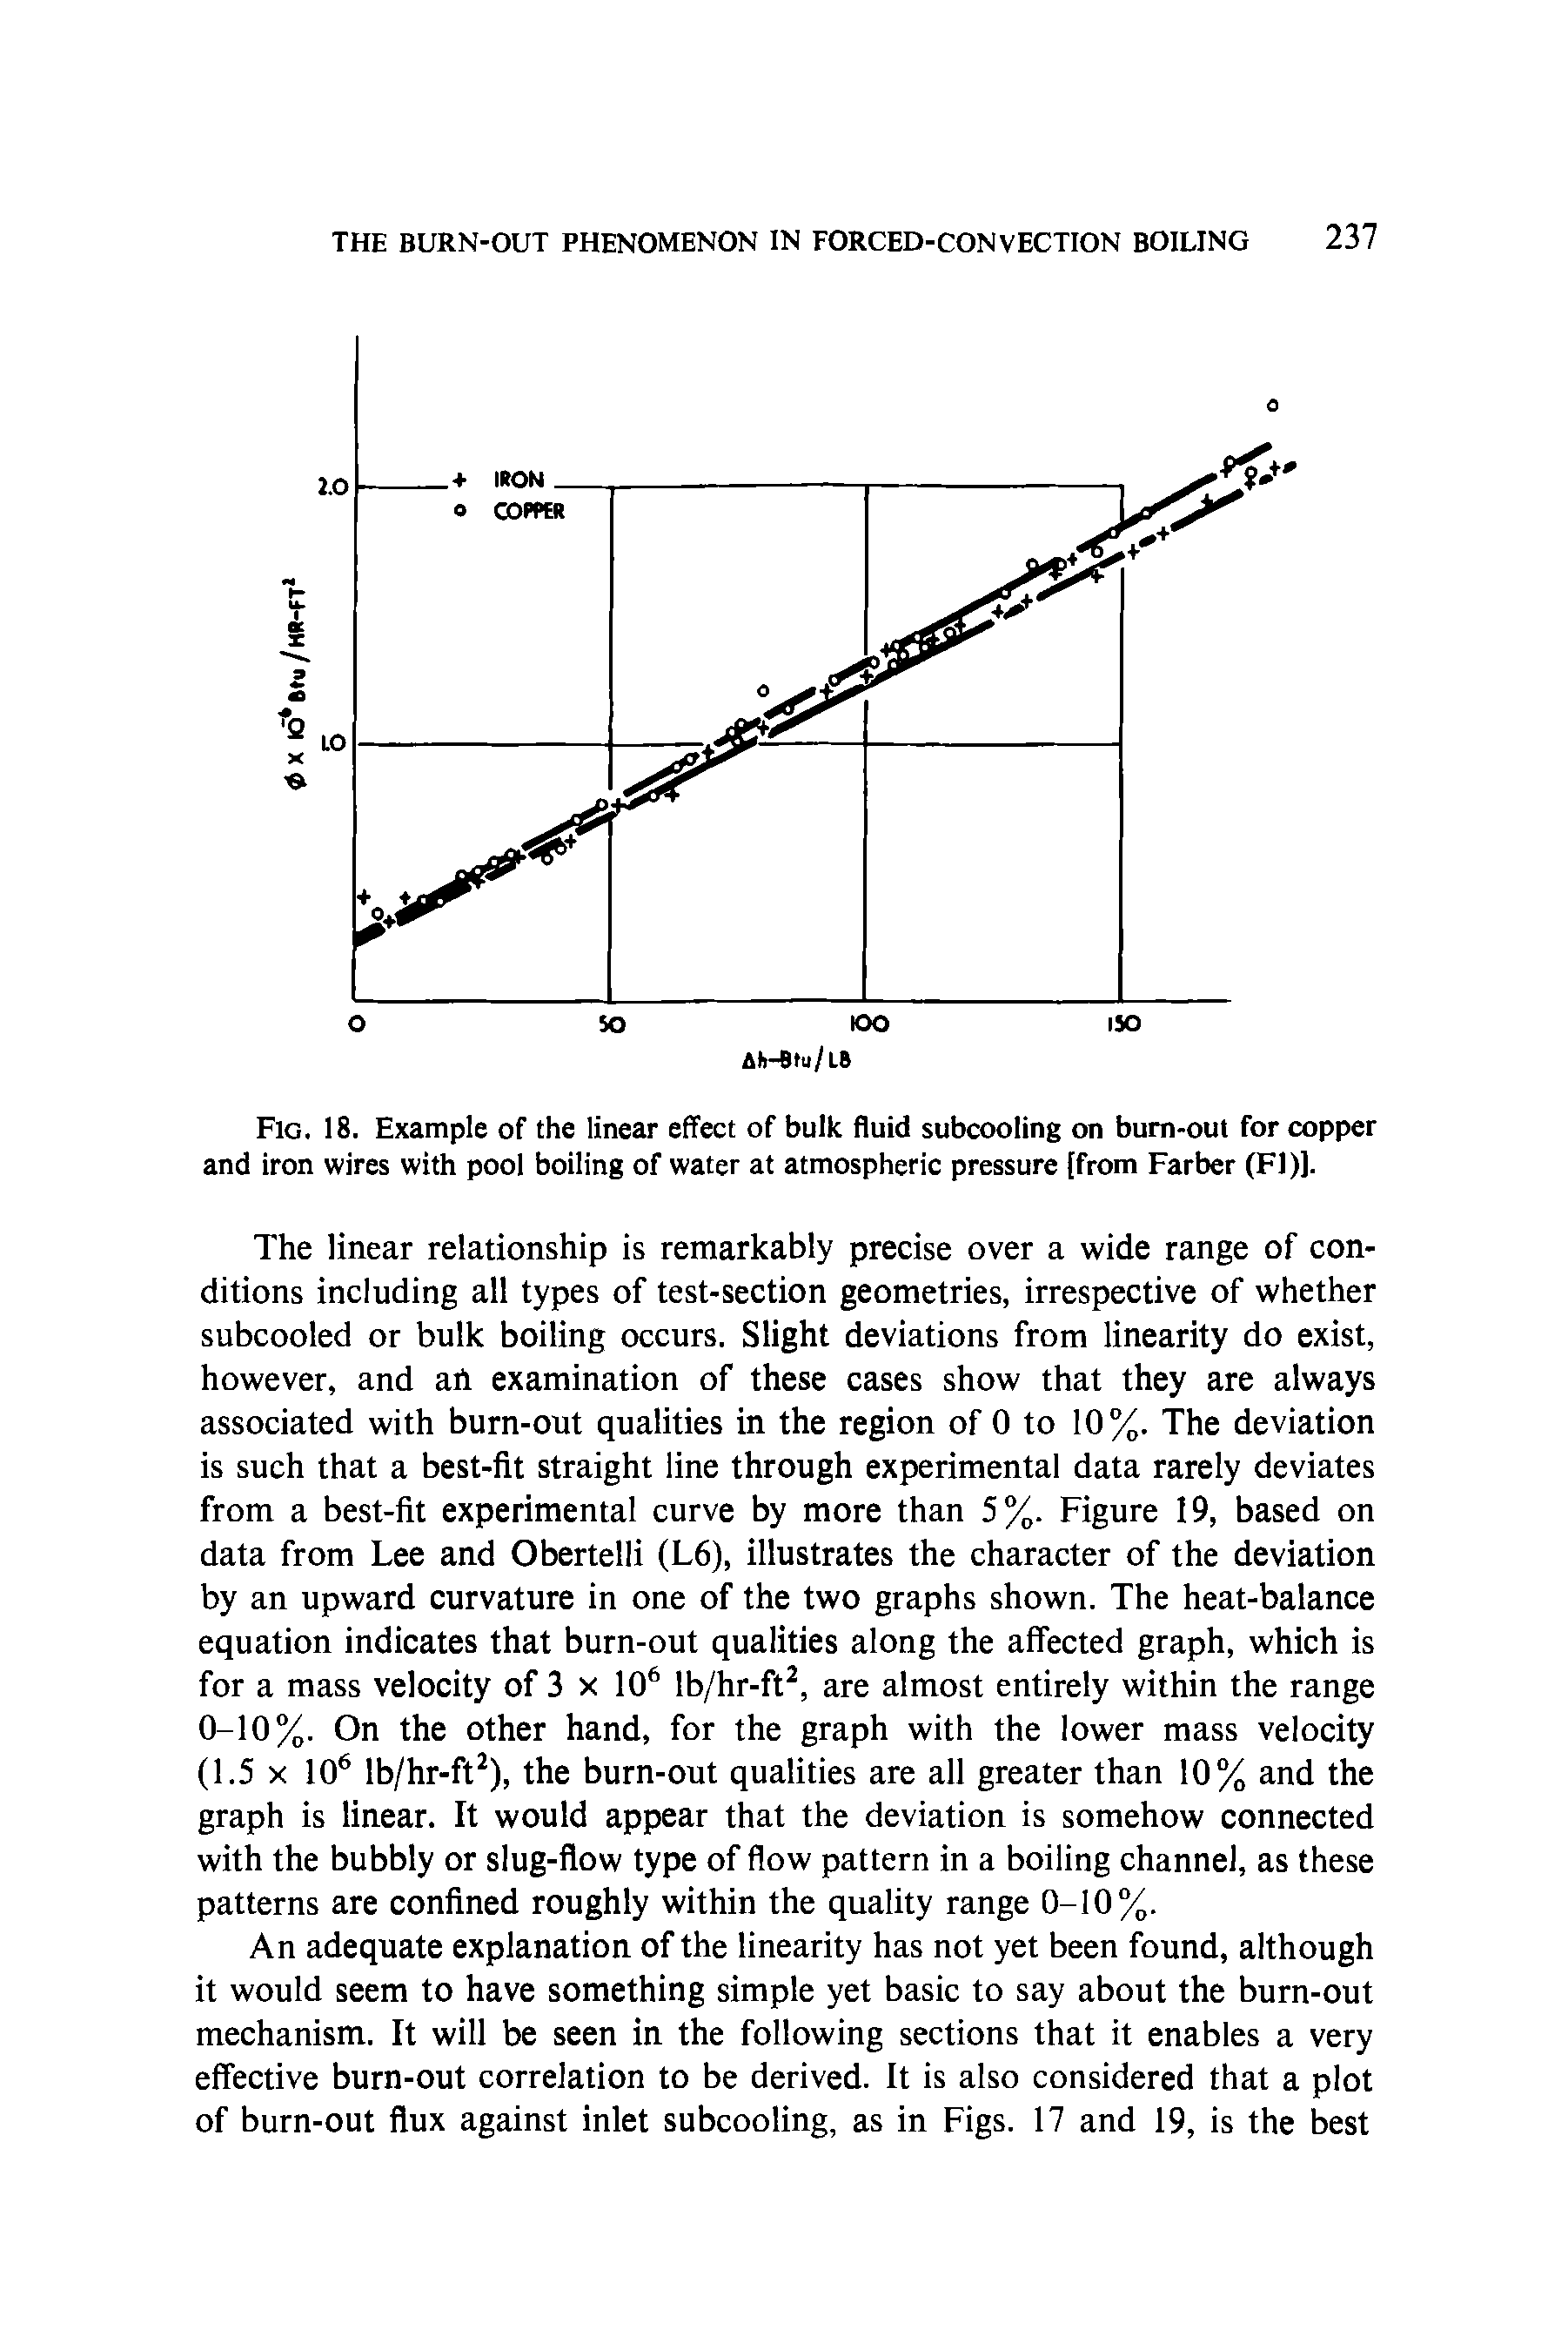 Fig. 18. Example of the linear effect of bulk fluid subcooling on burn-out for copper and iron wires with pool boiling of water at atmospheric pressure [from Farber (FI)].